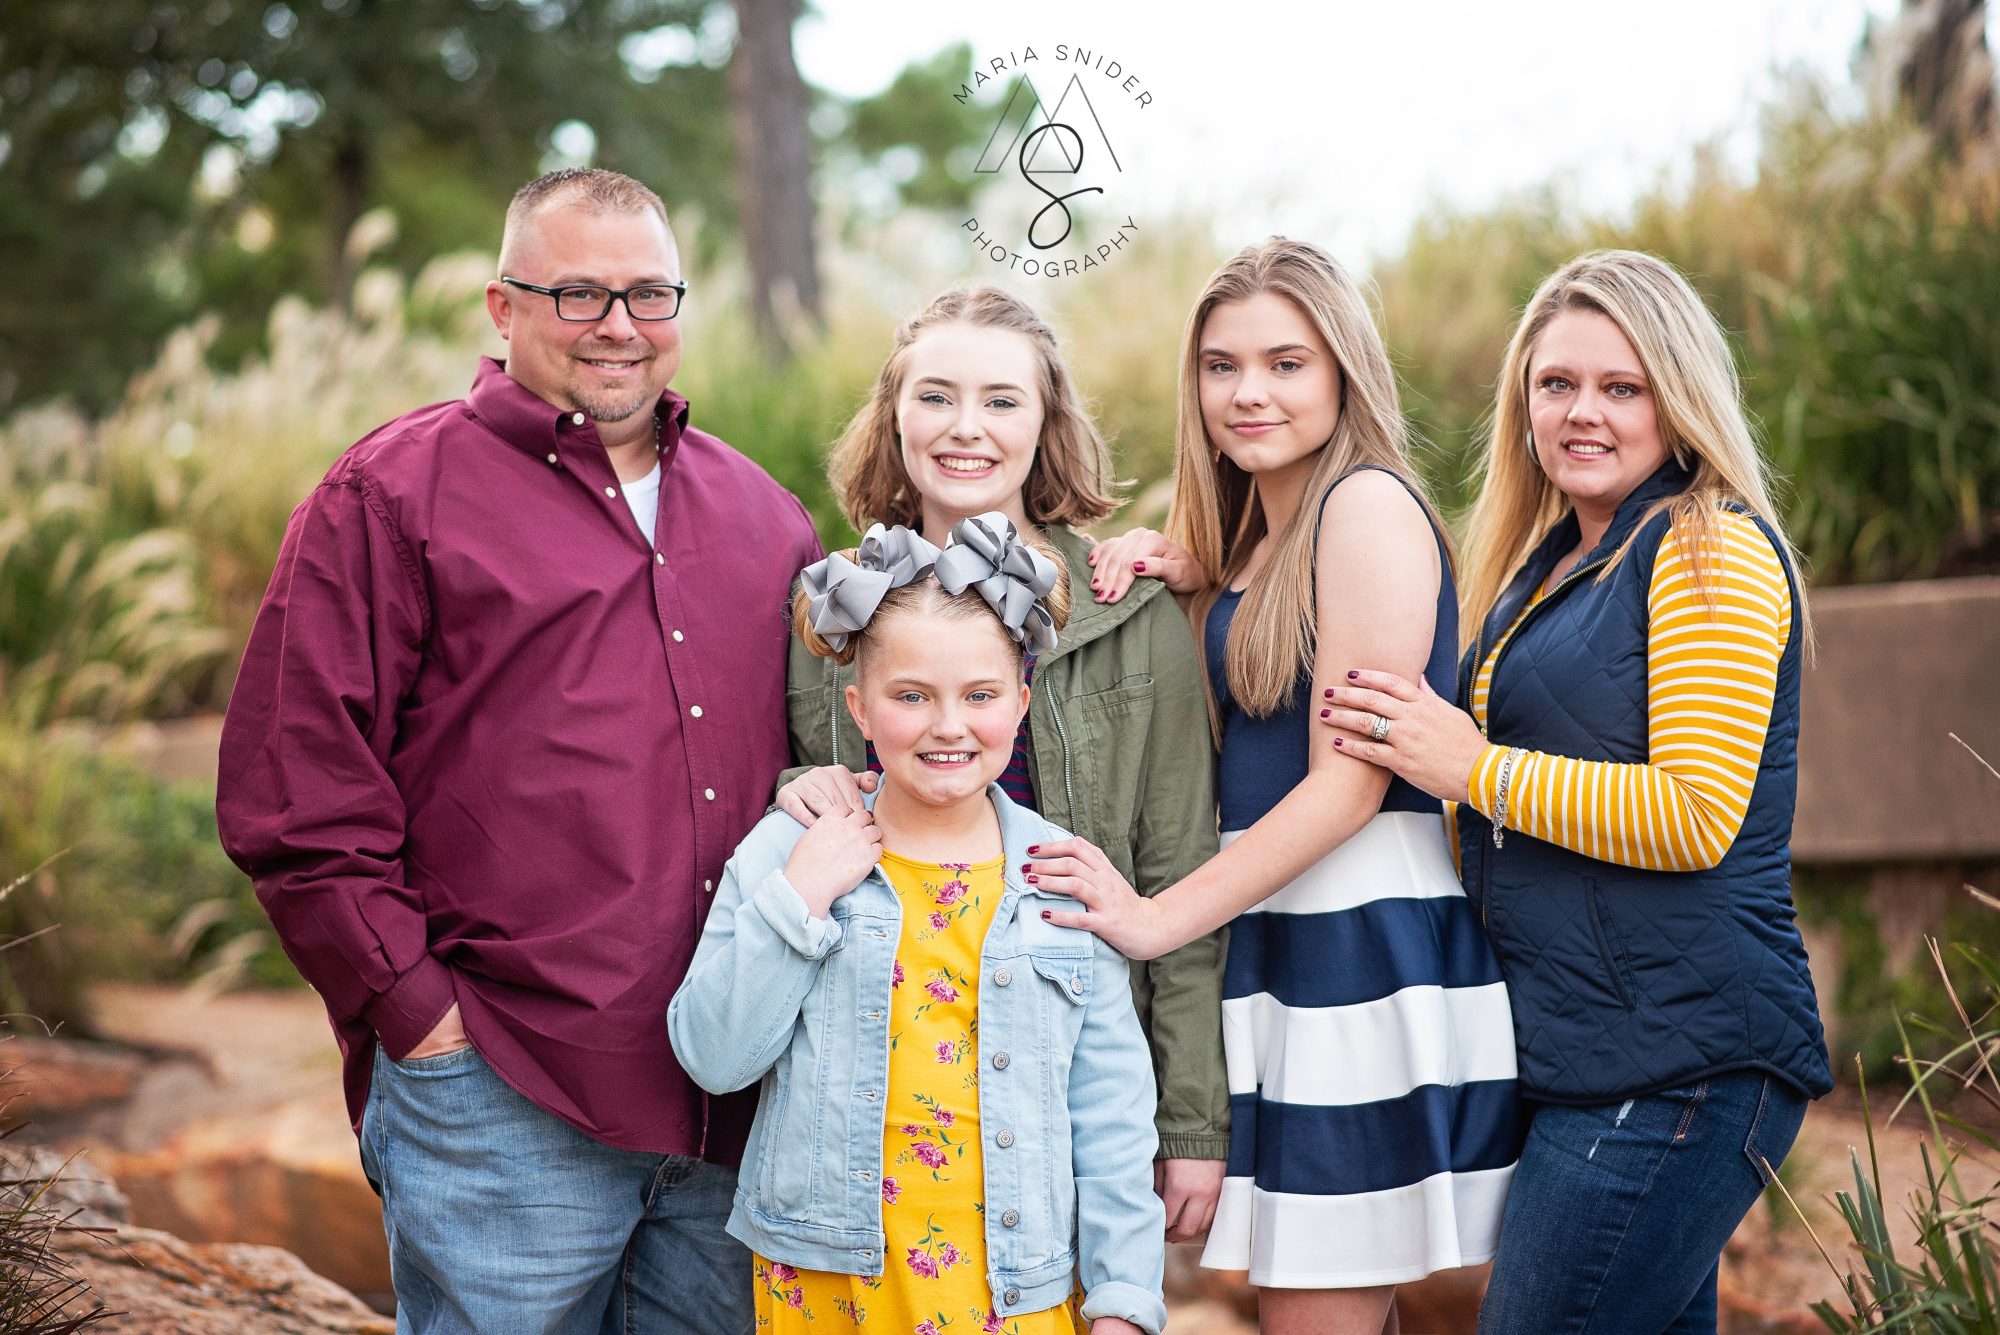 houston family photography with Maria Snider Photography